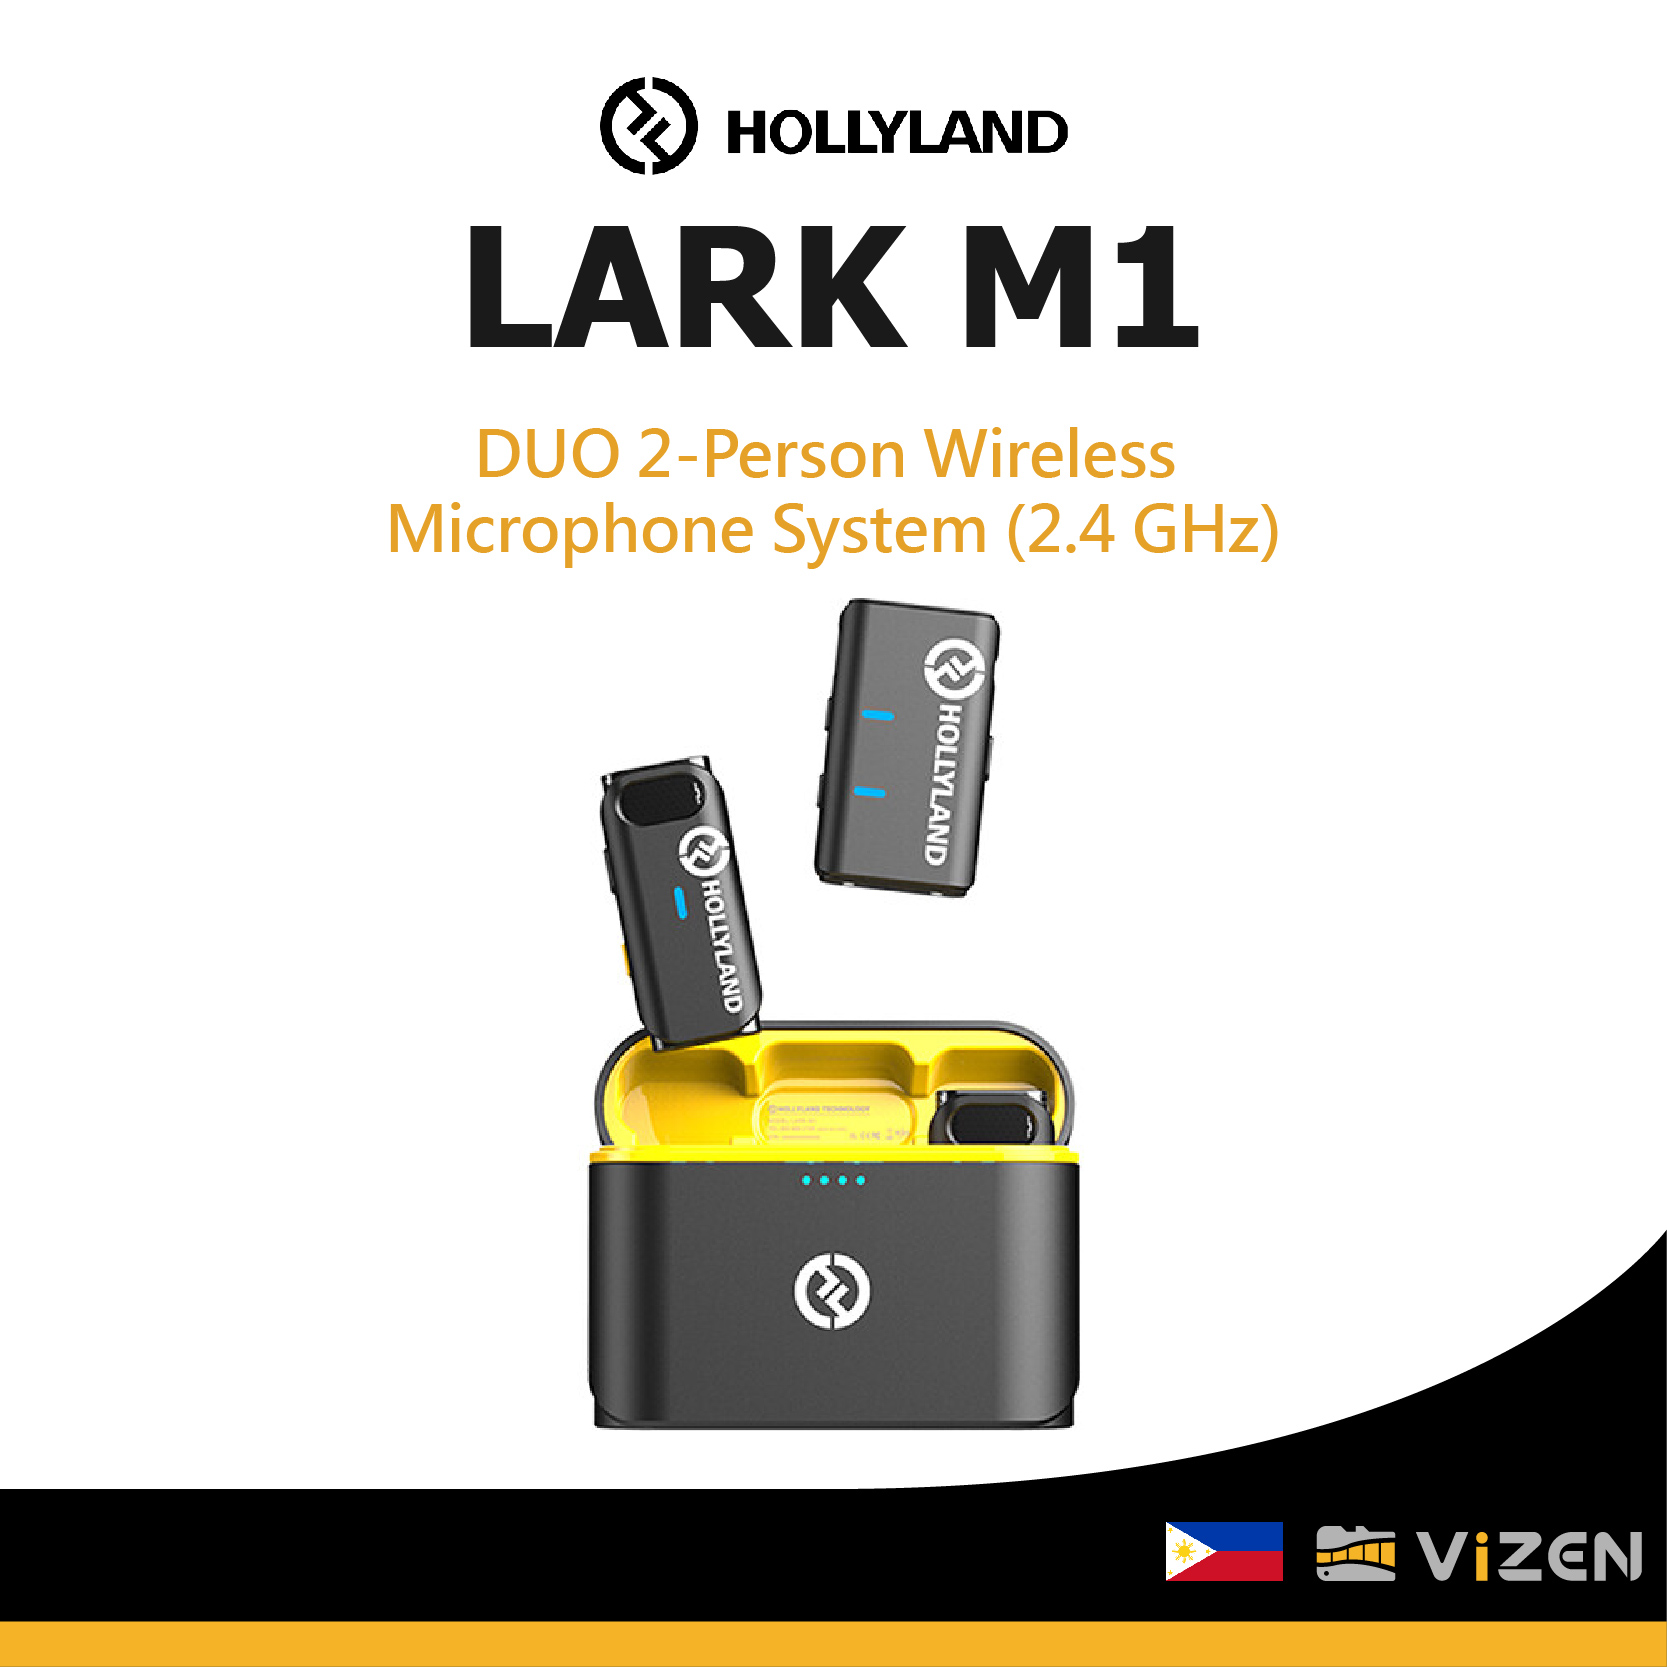 Hollyland LARK M1 DUO 2-Person Wireless Microphone System (2.4 GHz, Black)